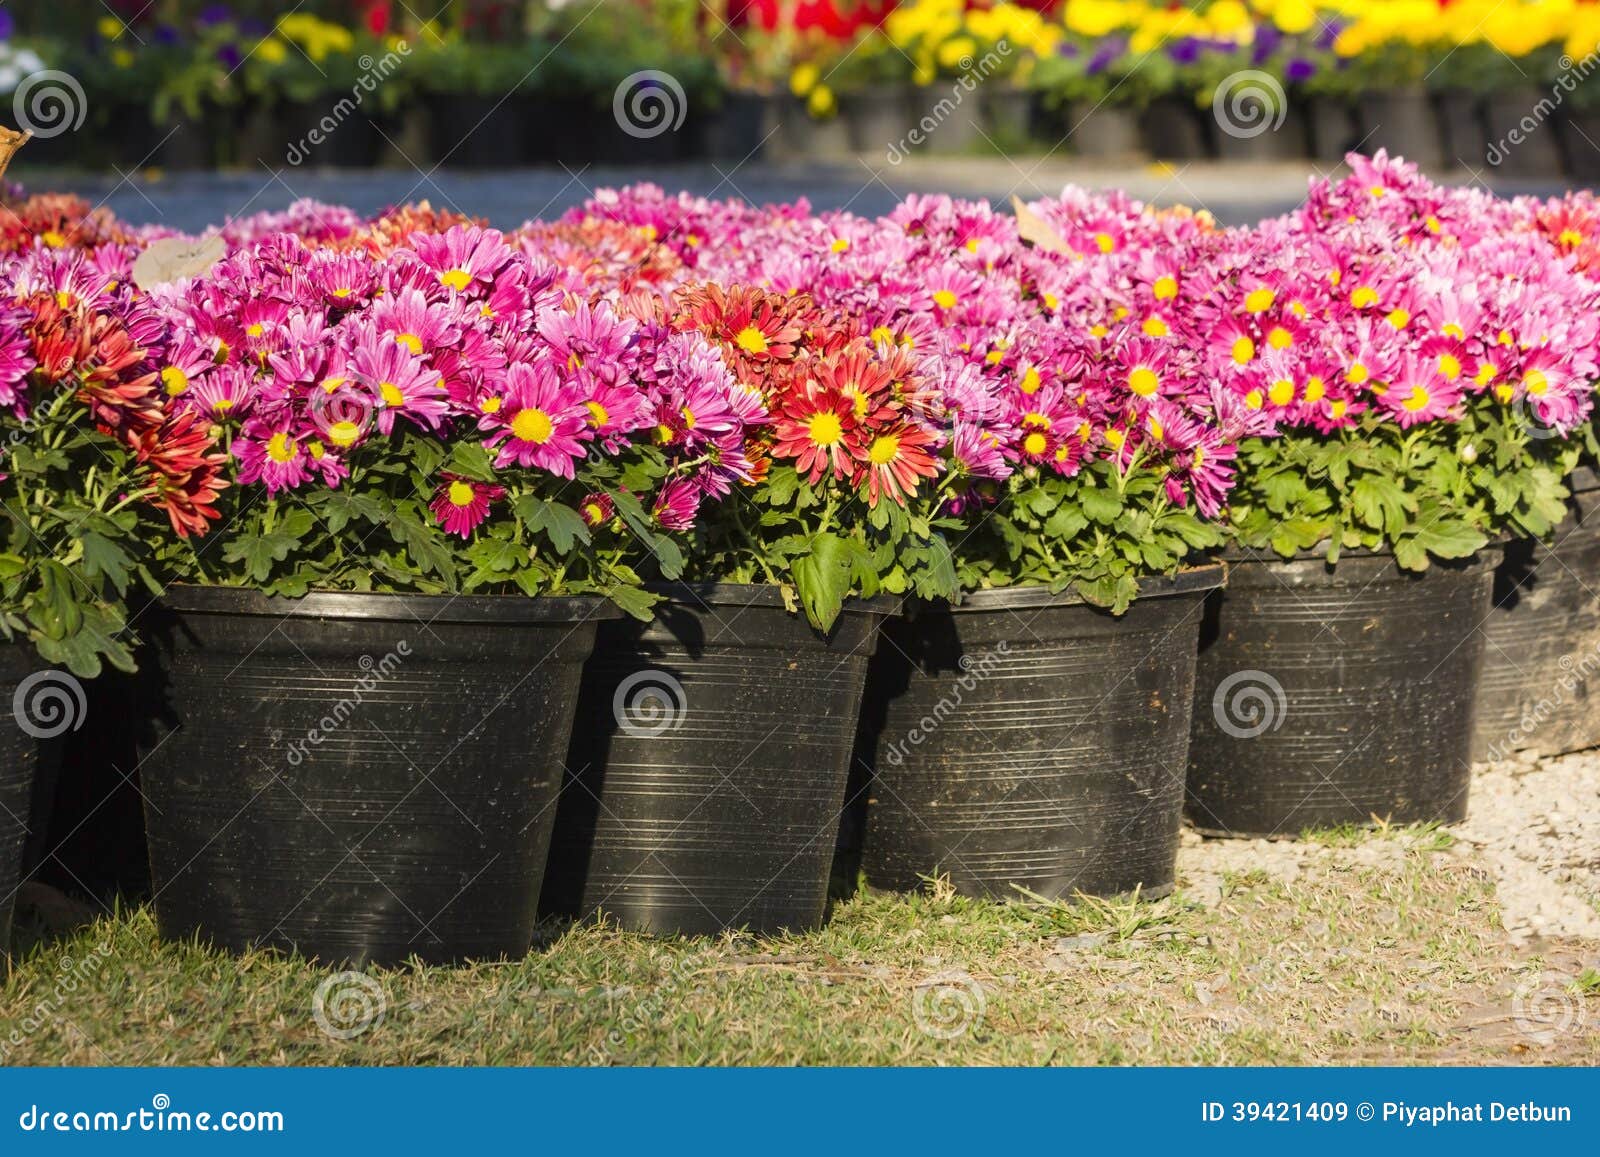 potted flower stock image. image of jardiniere, pink - 39421409